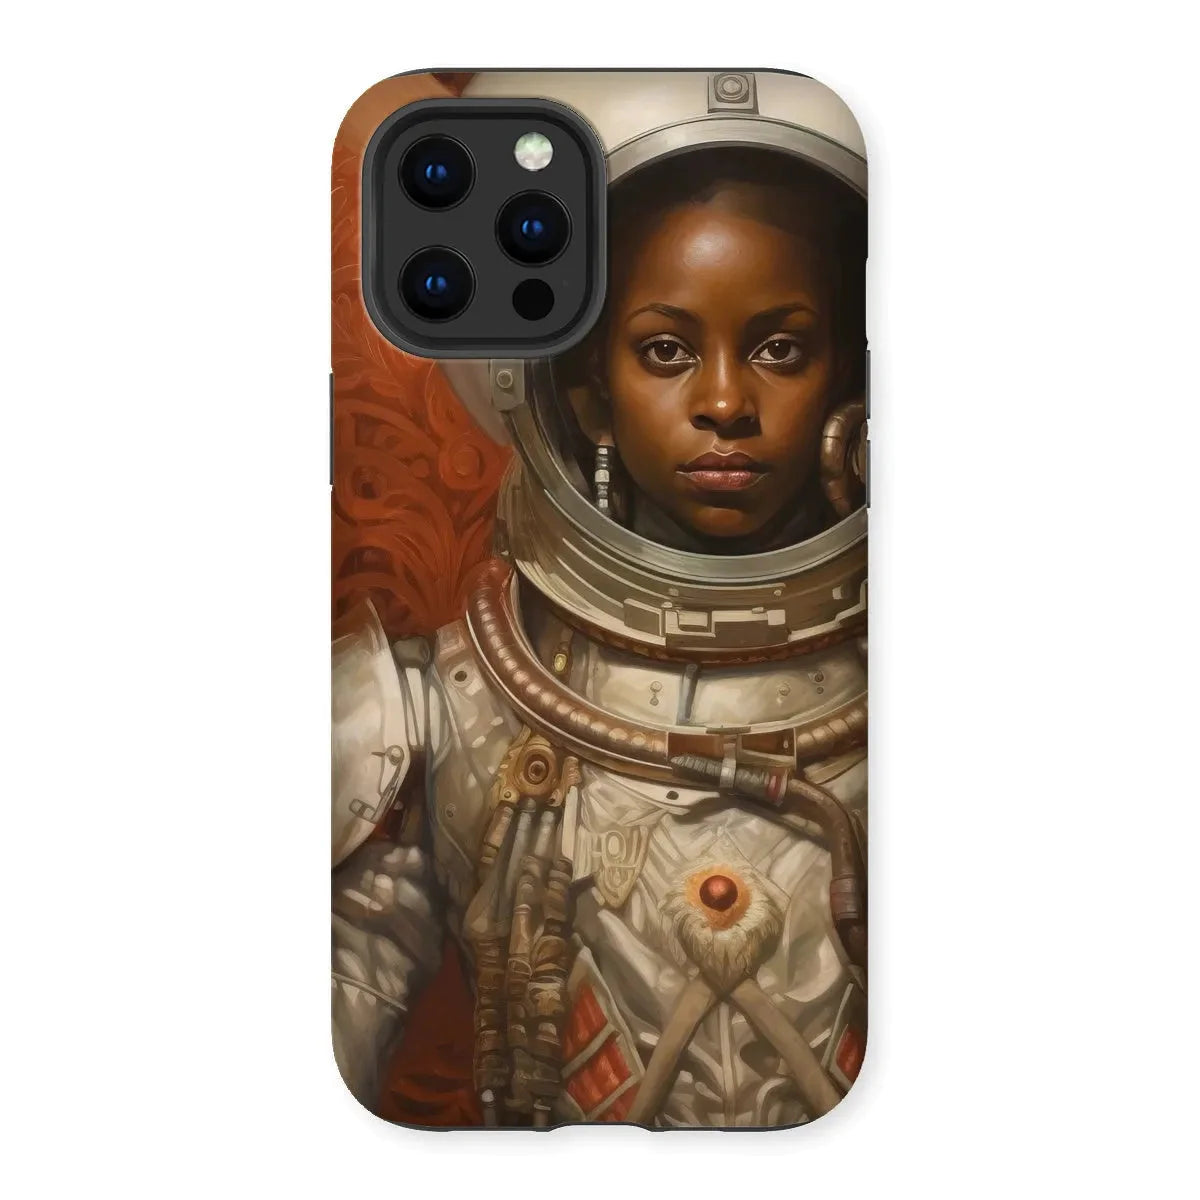 Ava The Lesbian Astronaut - Sapphic Aesthetic Phone Case - Iphone 12 Pro Max / Matte - Mobile Phone Cases - Aesthetic